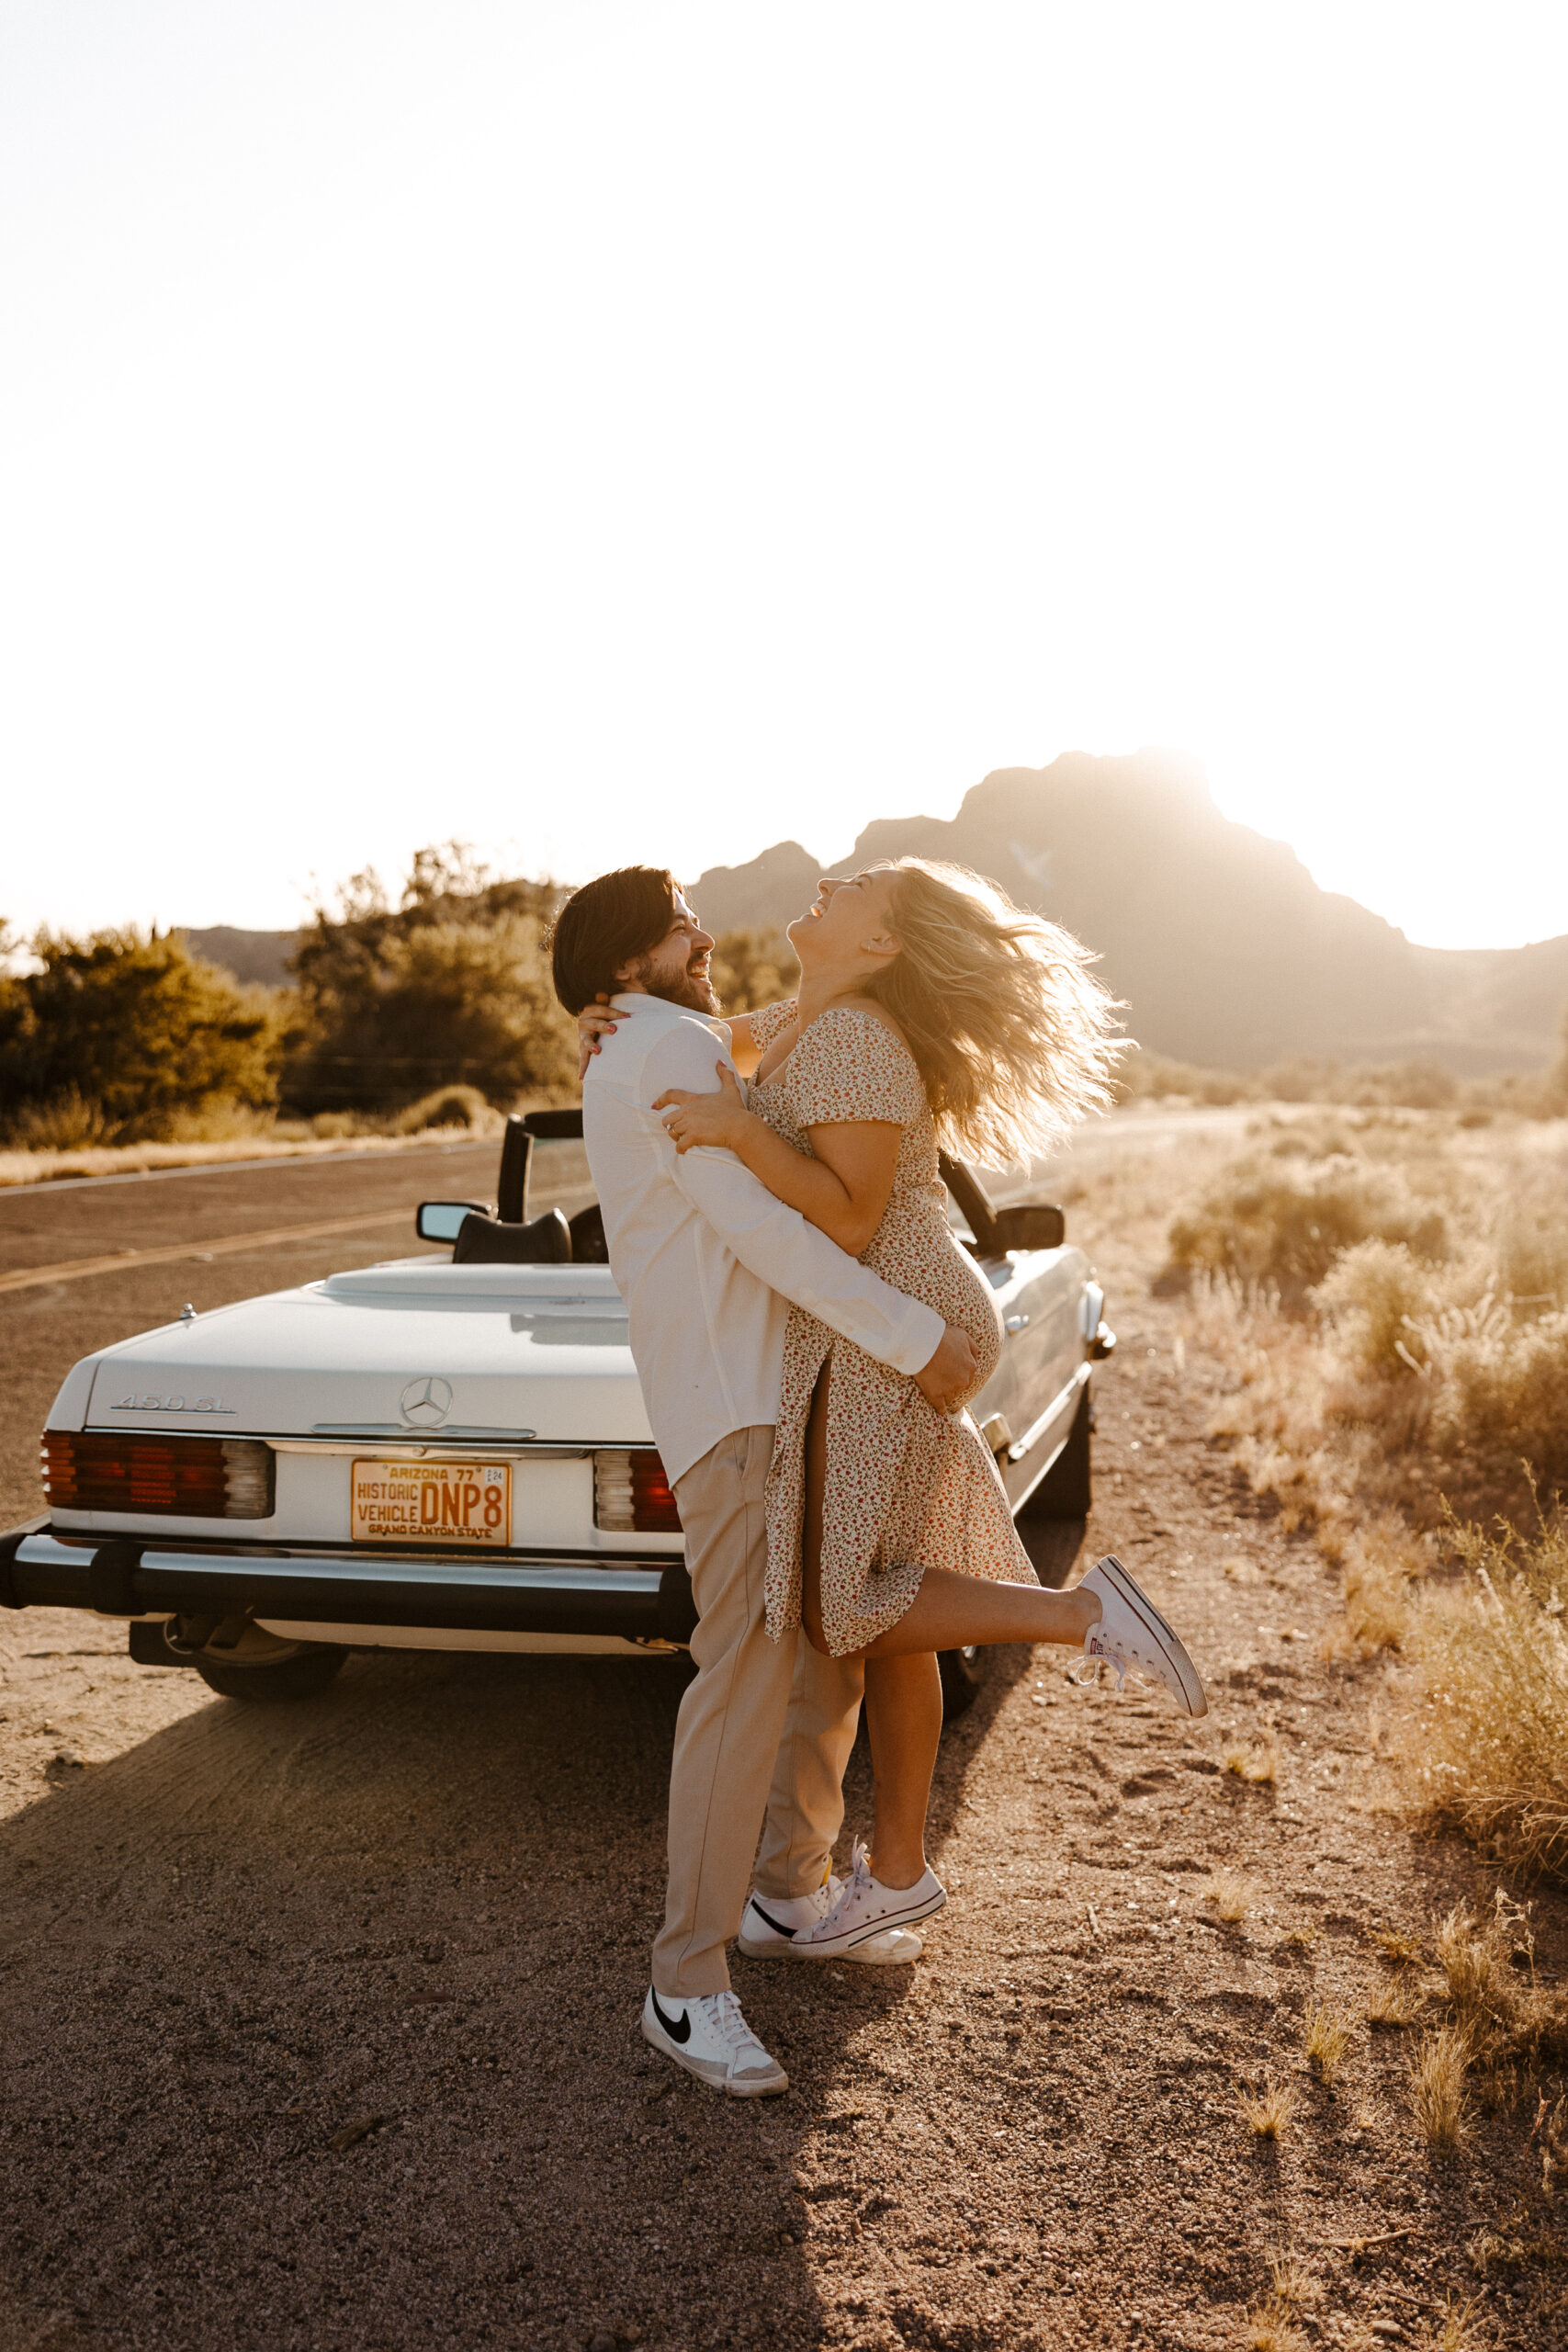 finace picking up other fiance and laughing at the back of car for vintage car engagement photos